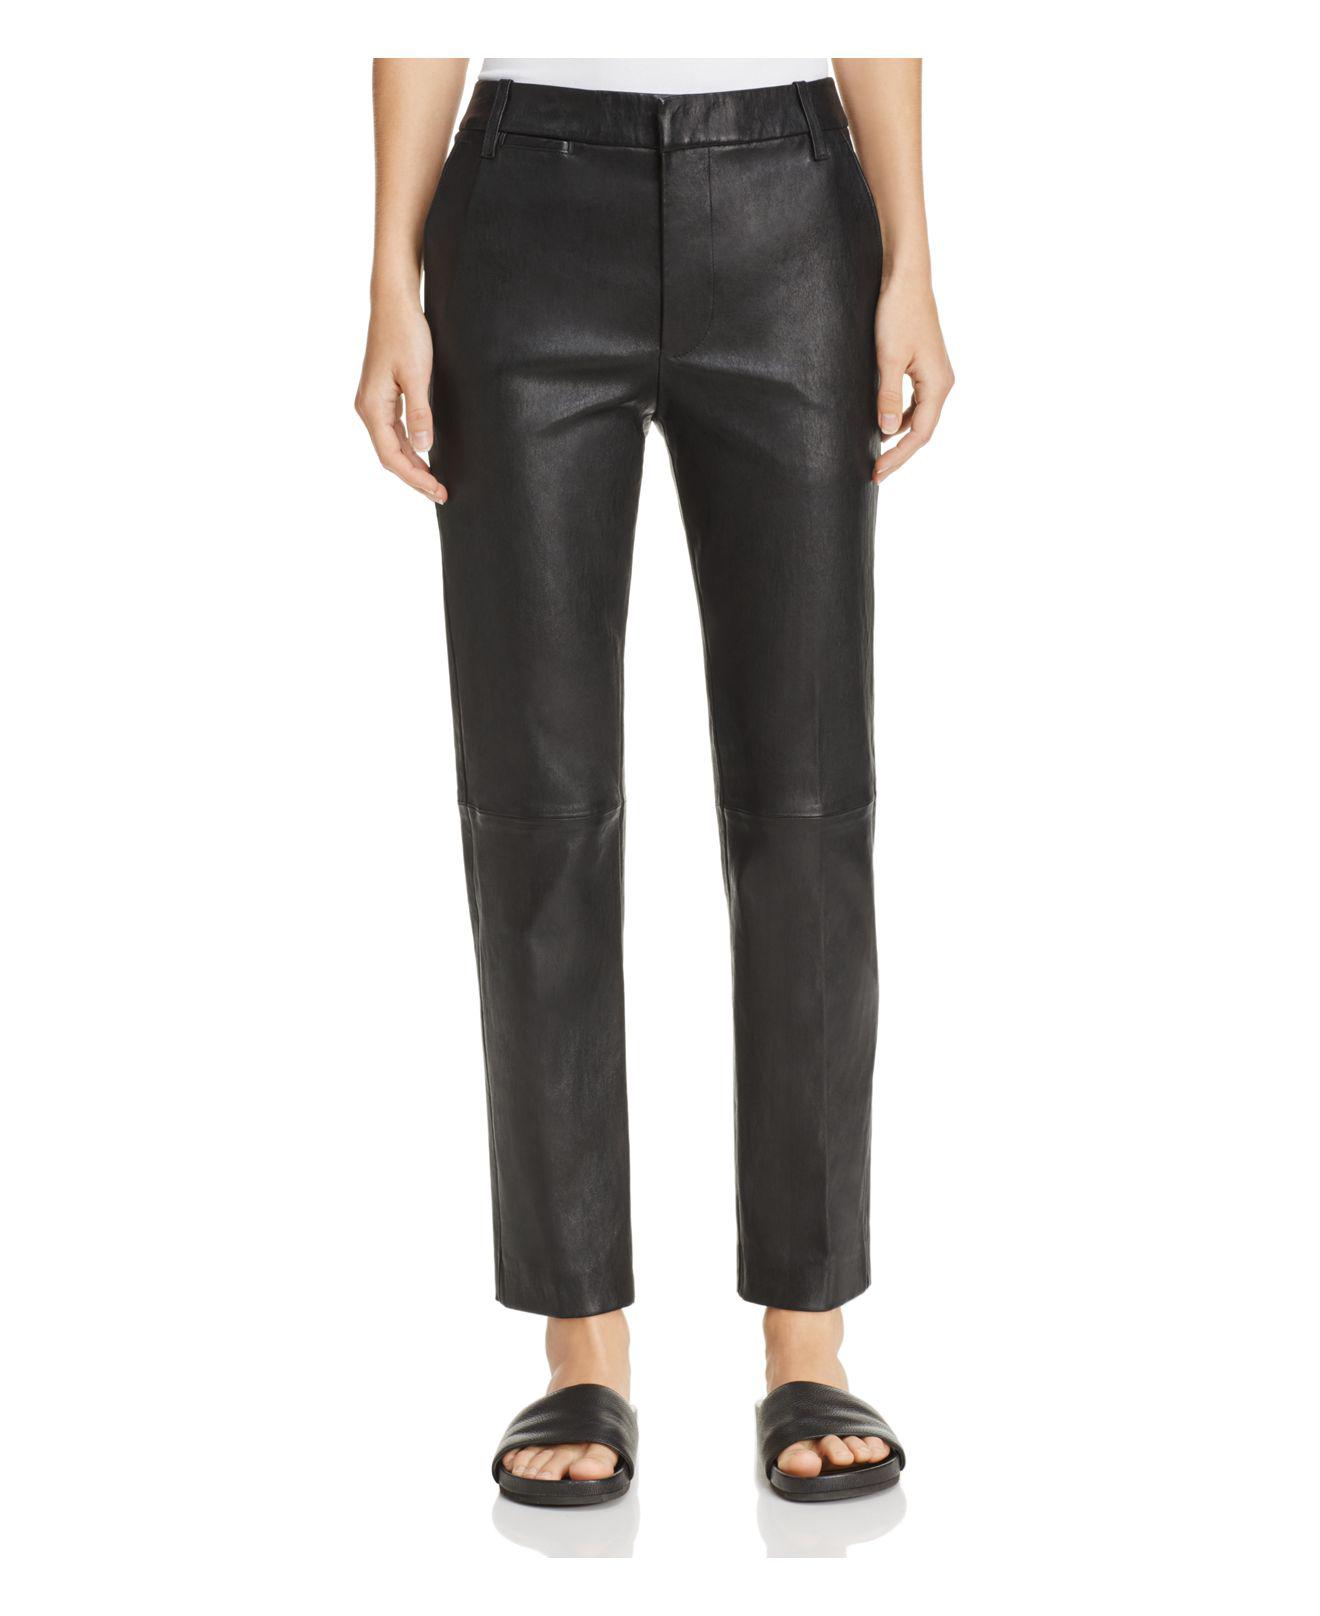 Lyst - Vince Straight-leg Leather Pants in Black